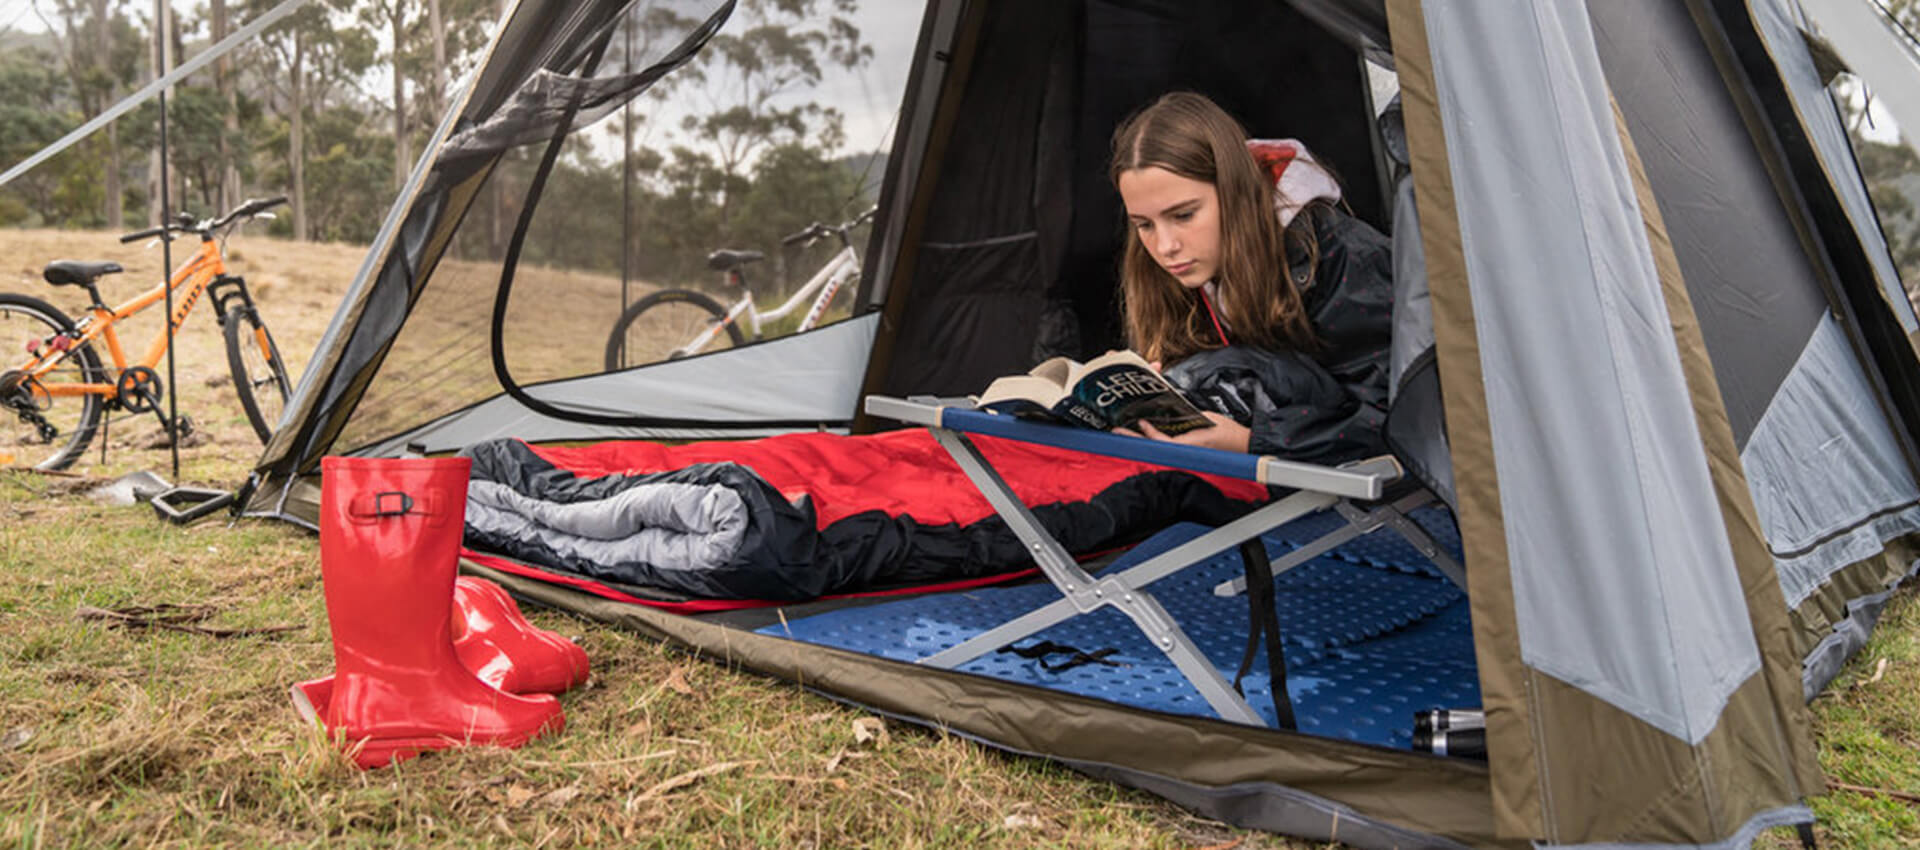 Camping Beds For Comfort In The Cold